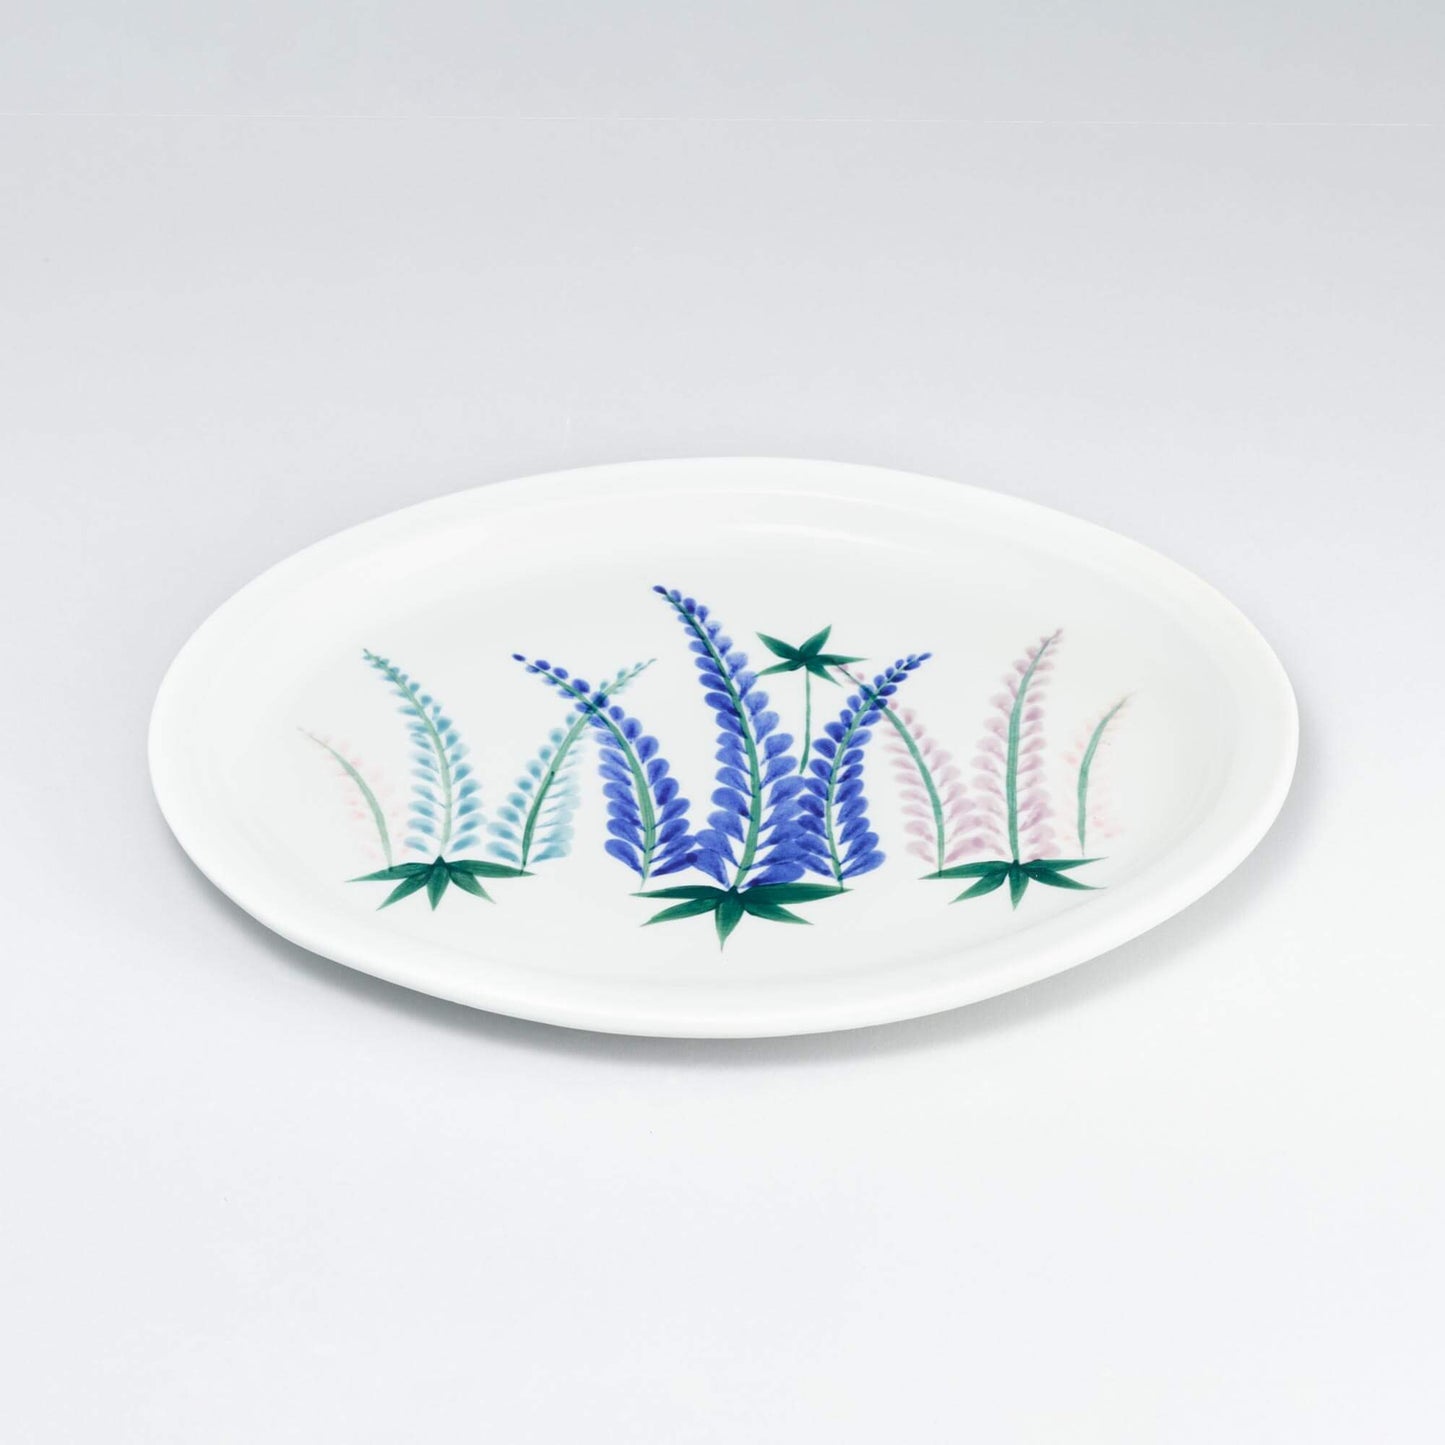 Handmade Pottery Oval Platter in Lupine pattern made by Georgetown Pottery in Maine